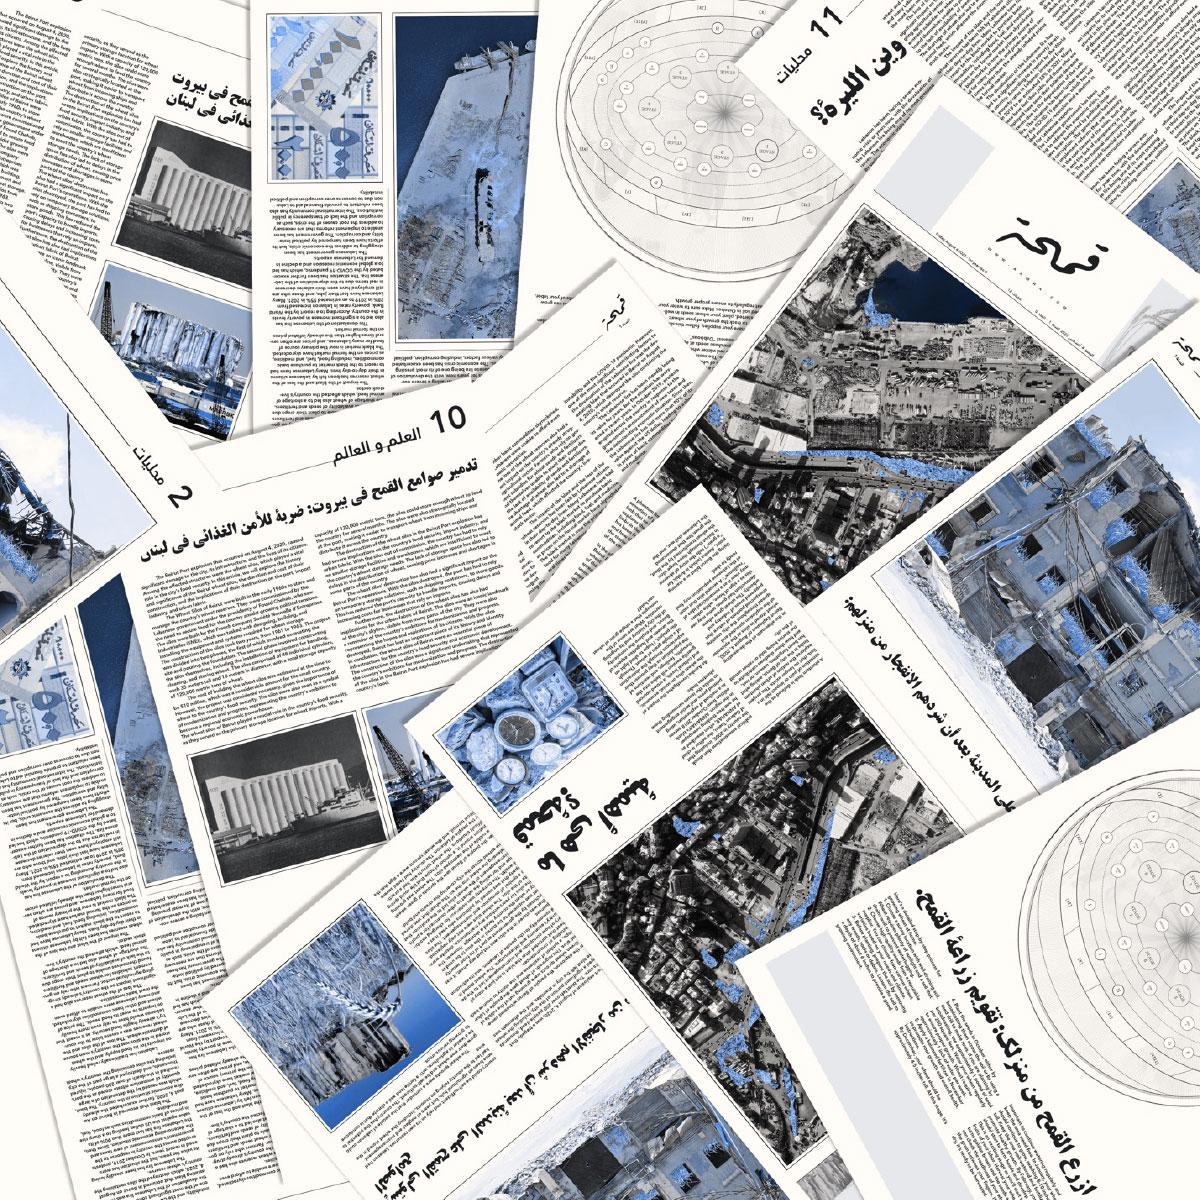 rendering of newspaper clippings with images of Beirut and text in Arabic